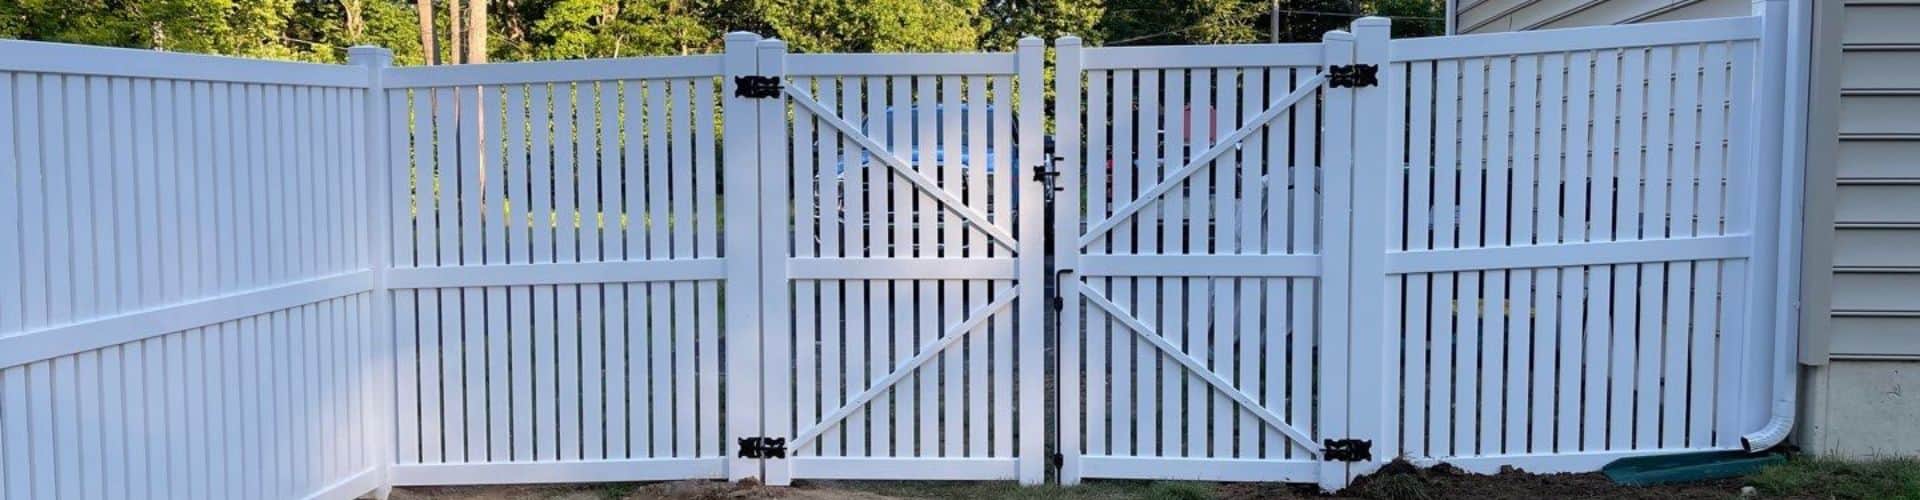 Fencing and Security Gates in Newark